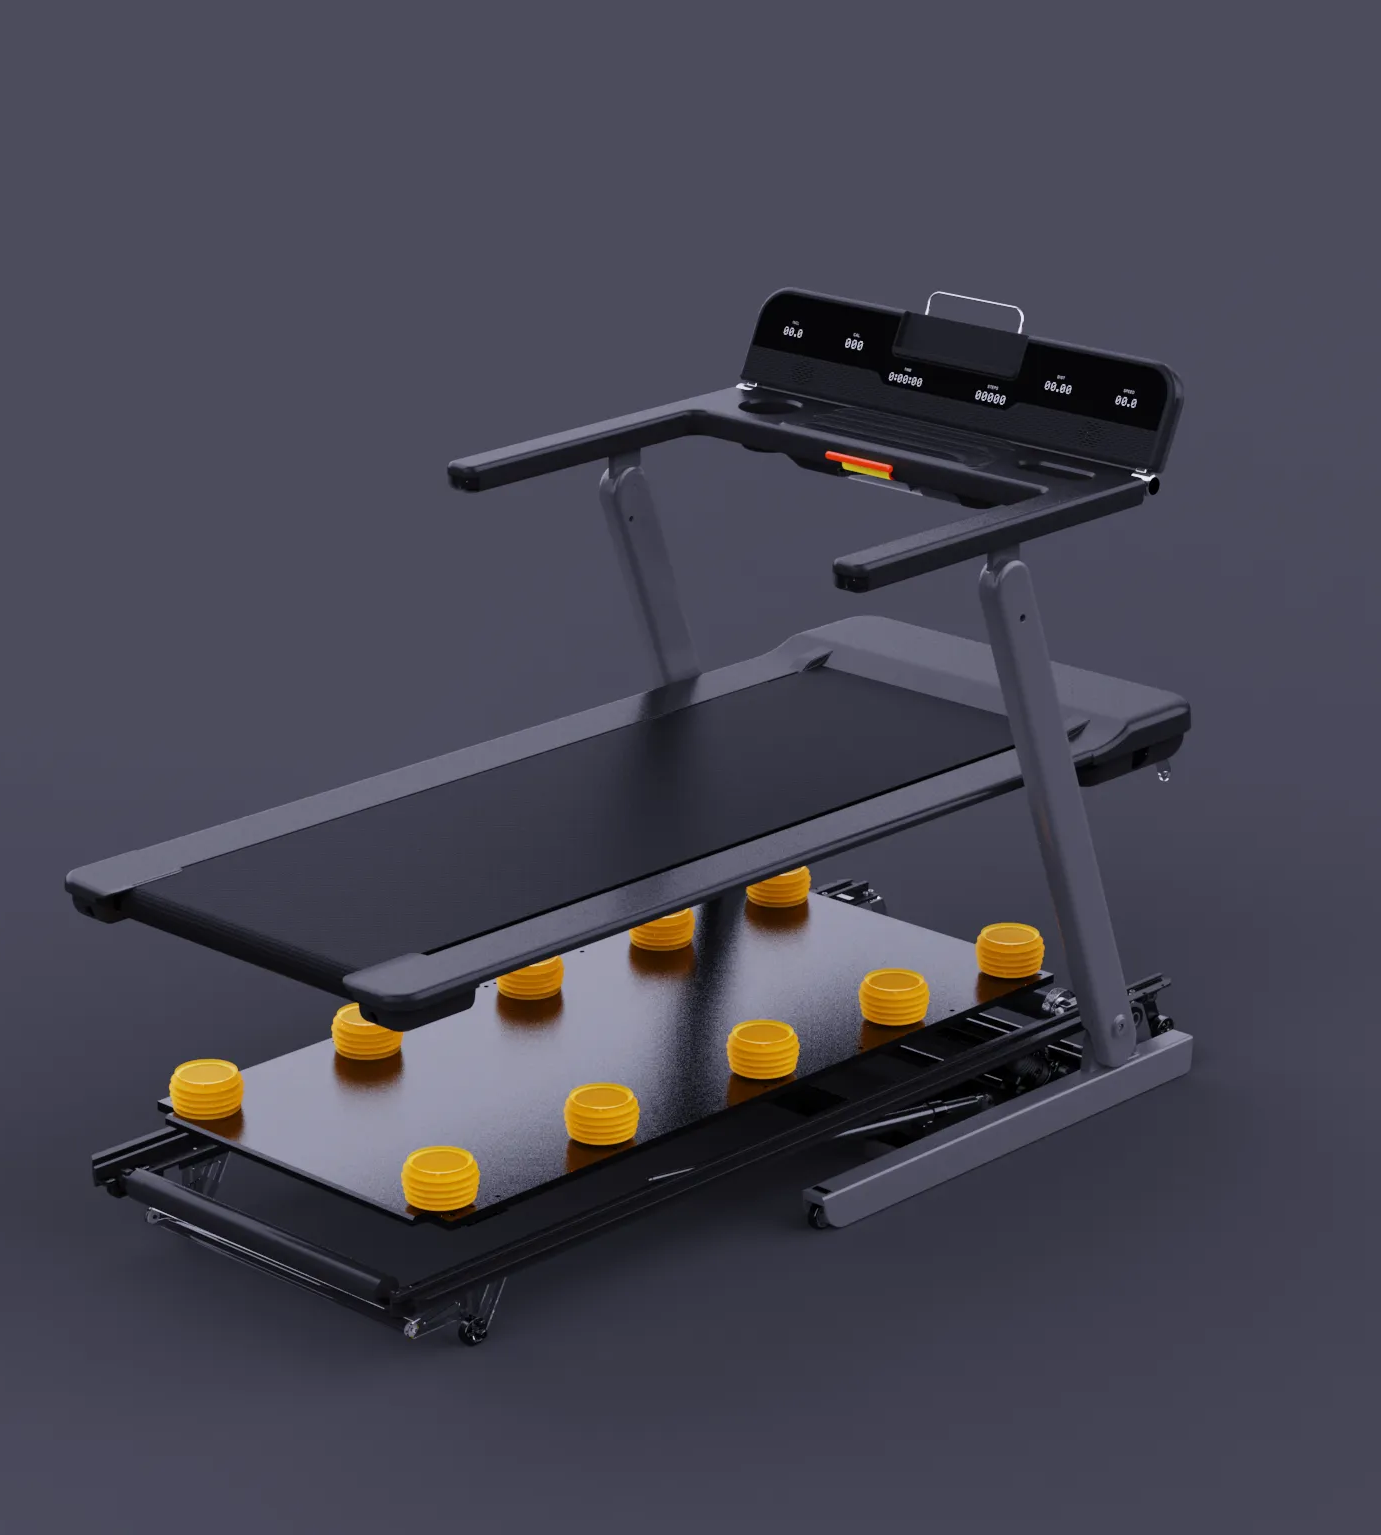 Renhe Home Gym - Compact Design, Ultimate Performance